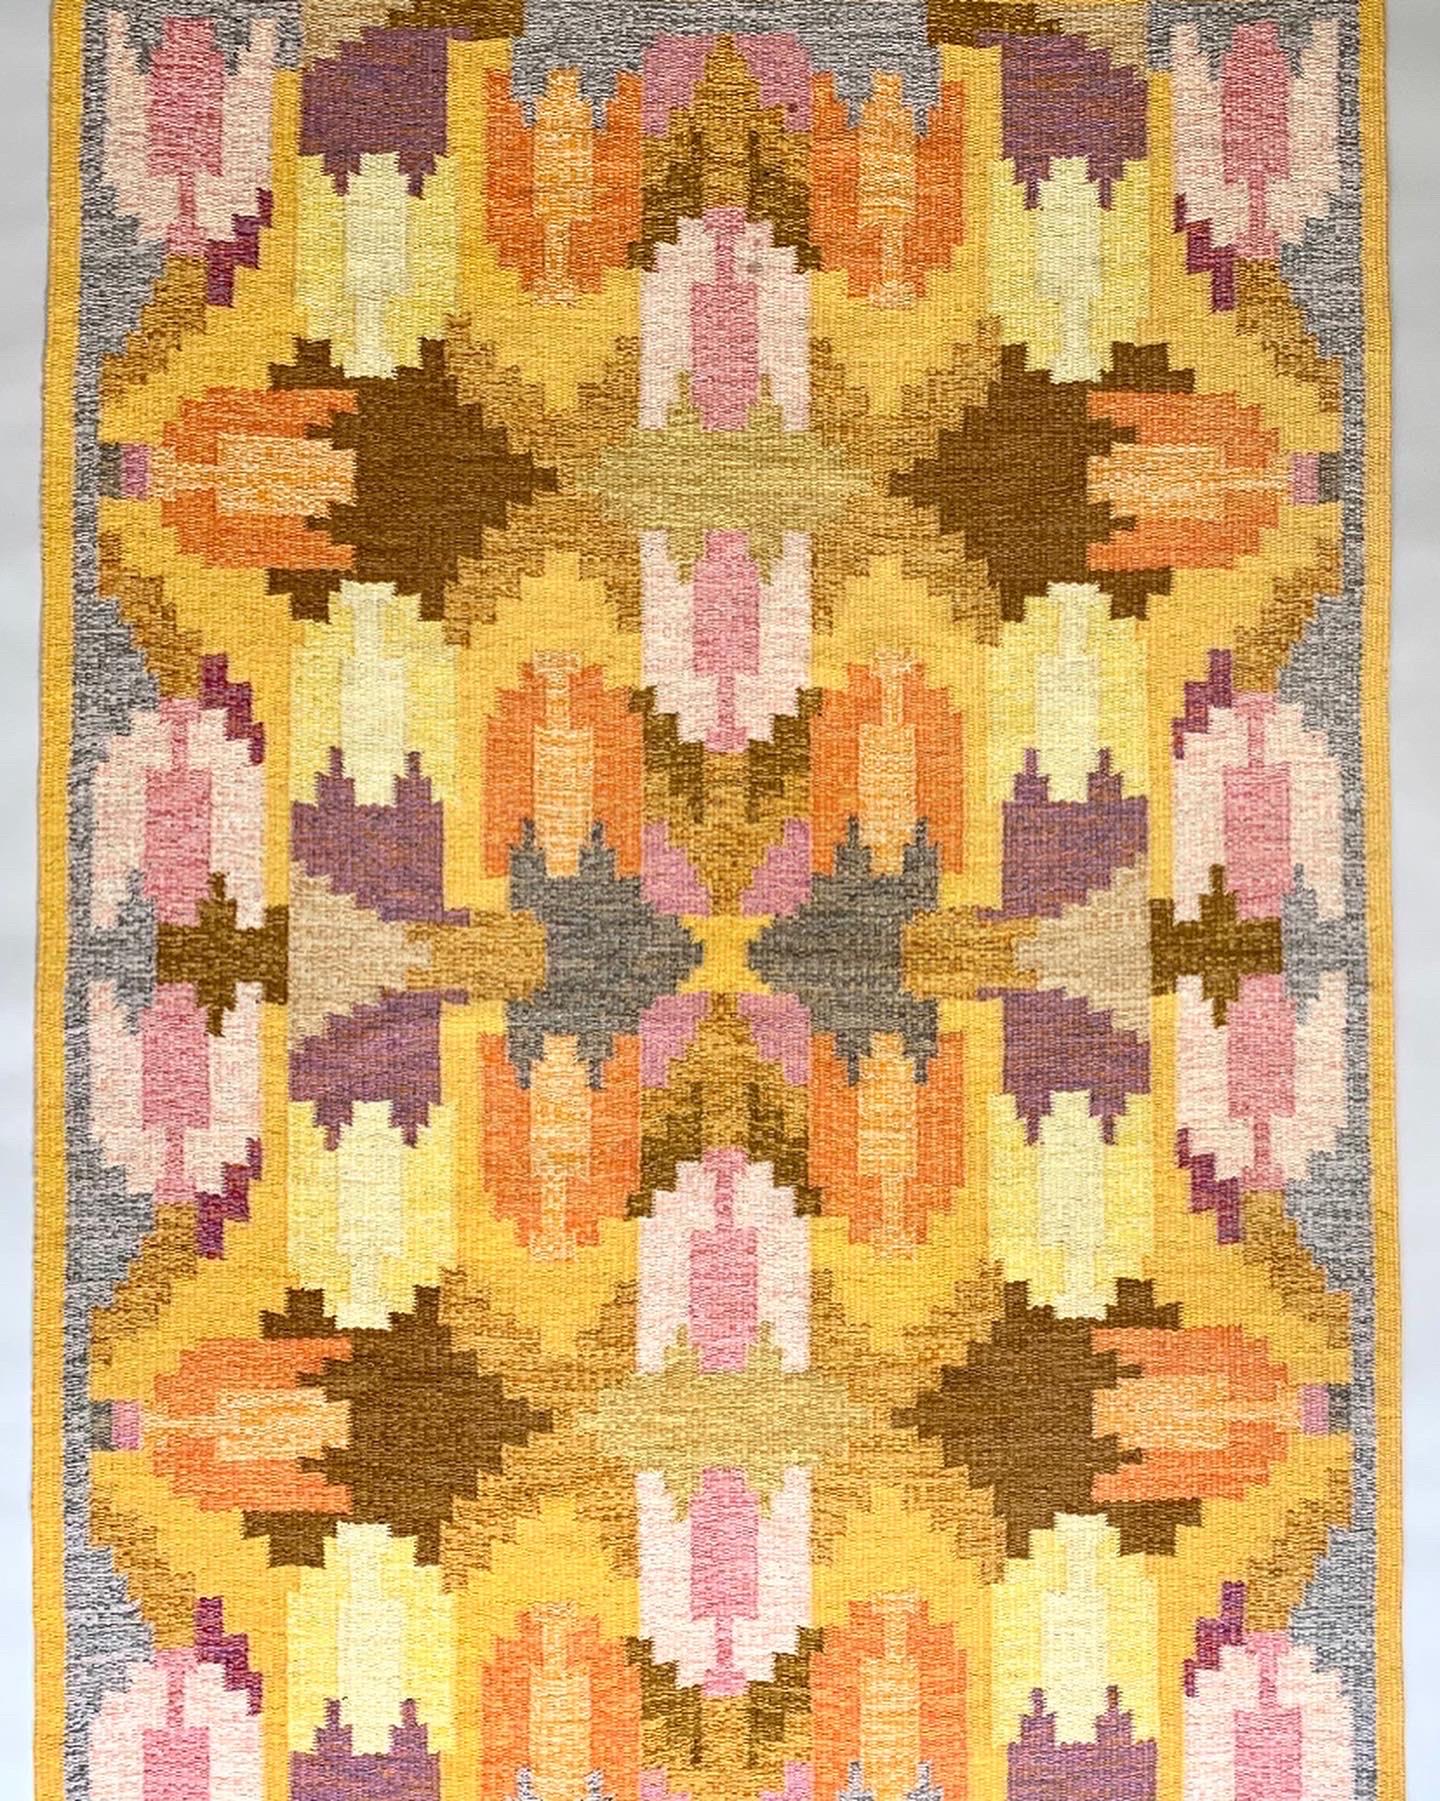 Very rare Ingegerd Silow rug with tulip pattern in a beautiful color palette, hand-woven in Sweden in the 1950s. 

Beautiful color palette in yellow, orange, purple, pale pink, brown and gray in an almost kaleidoscopic pattern with tulips.